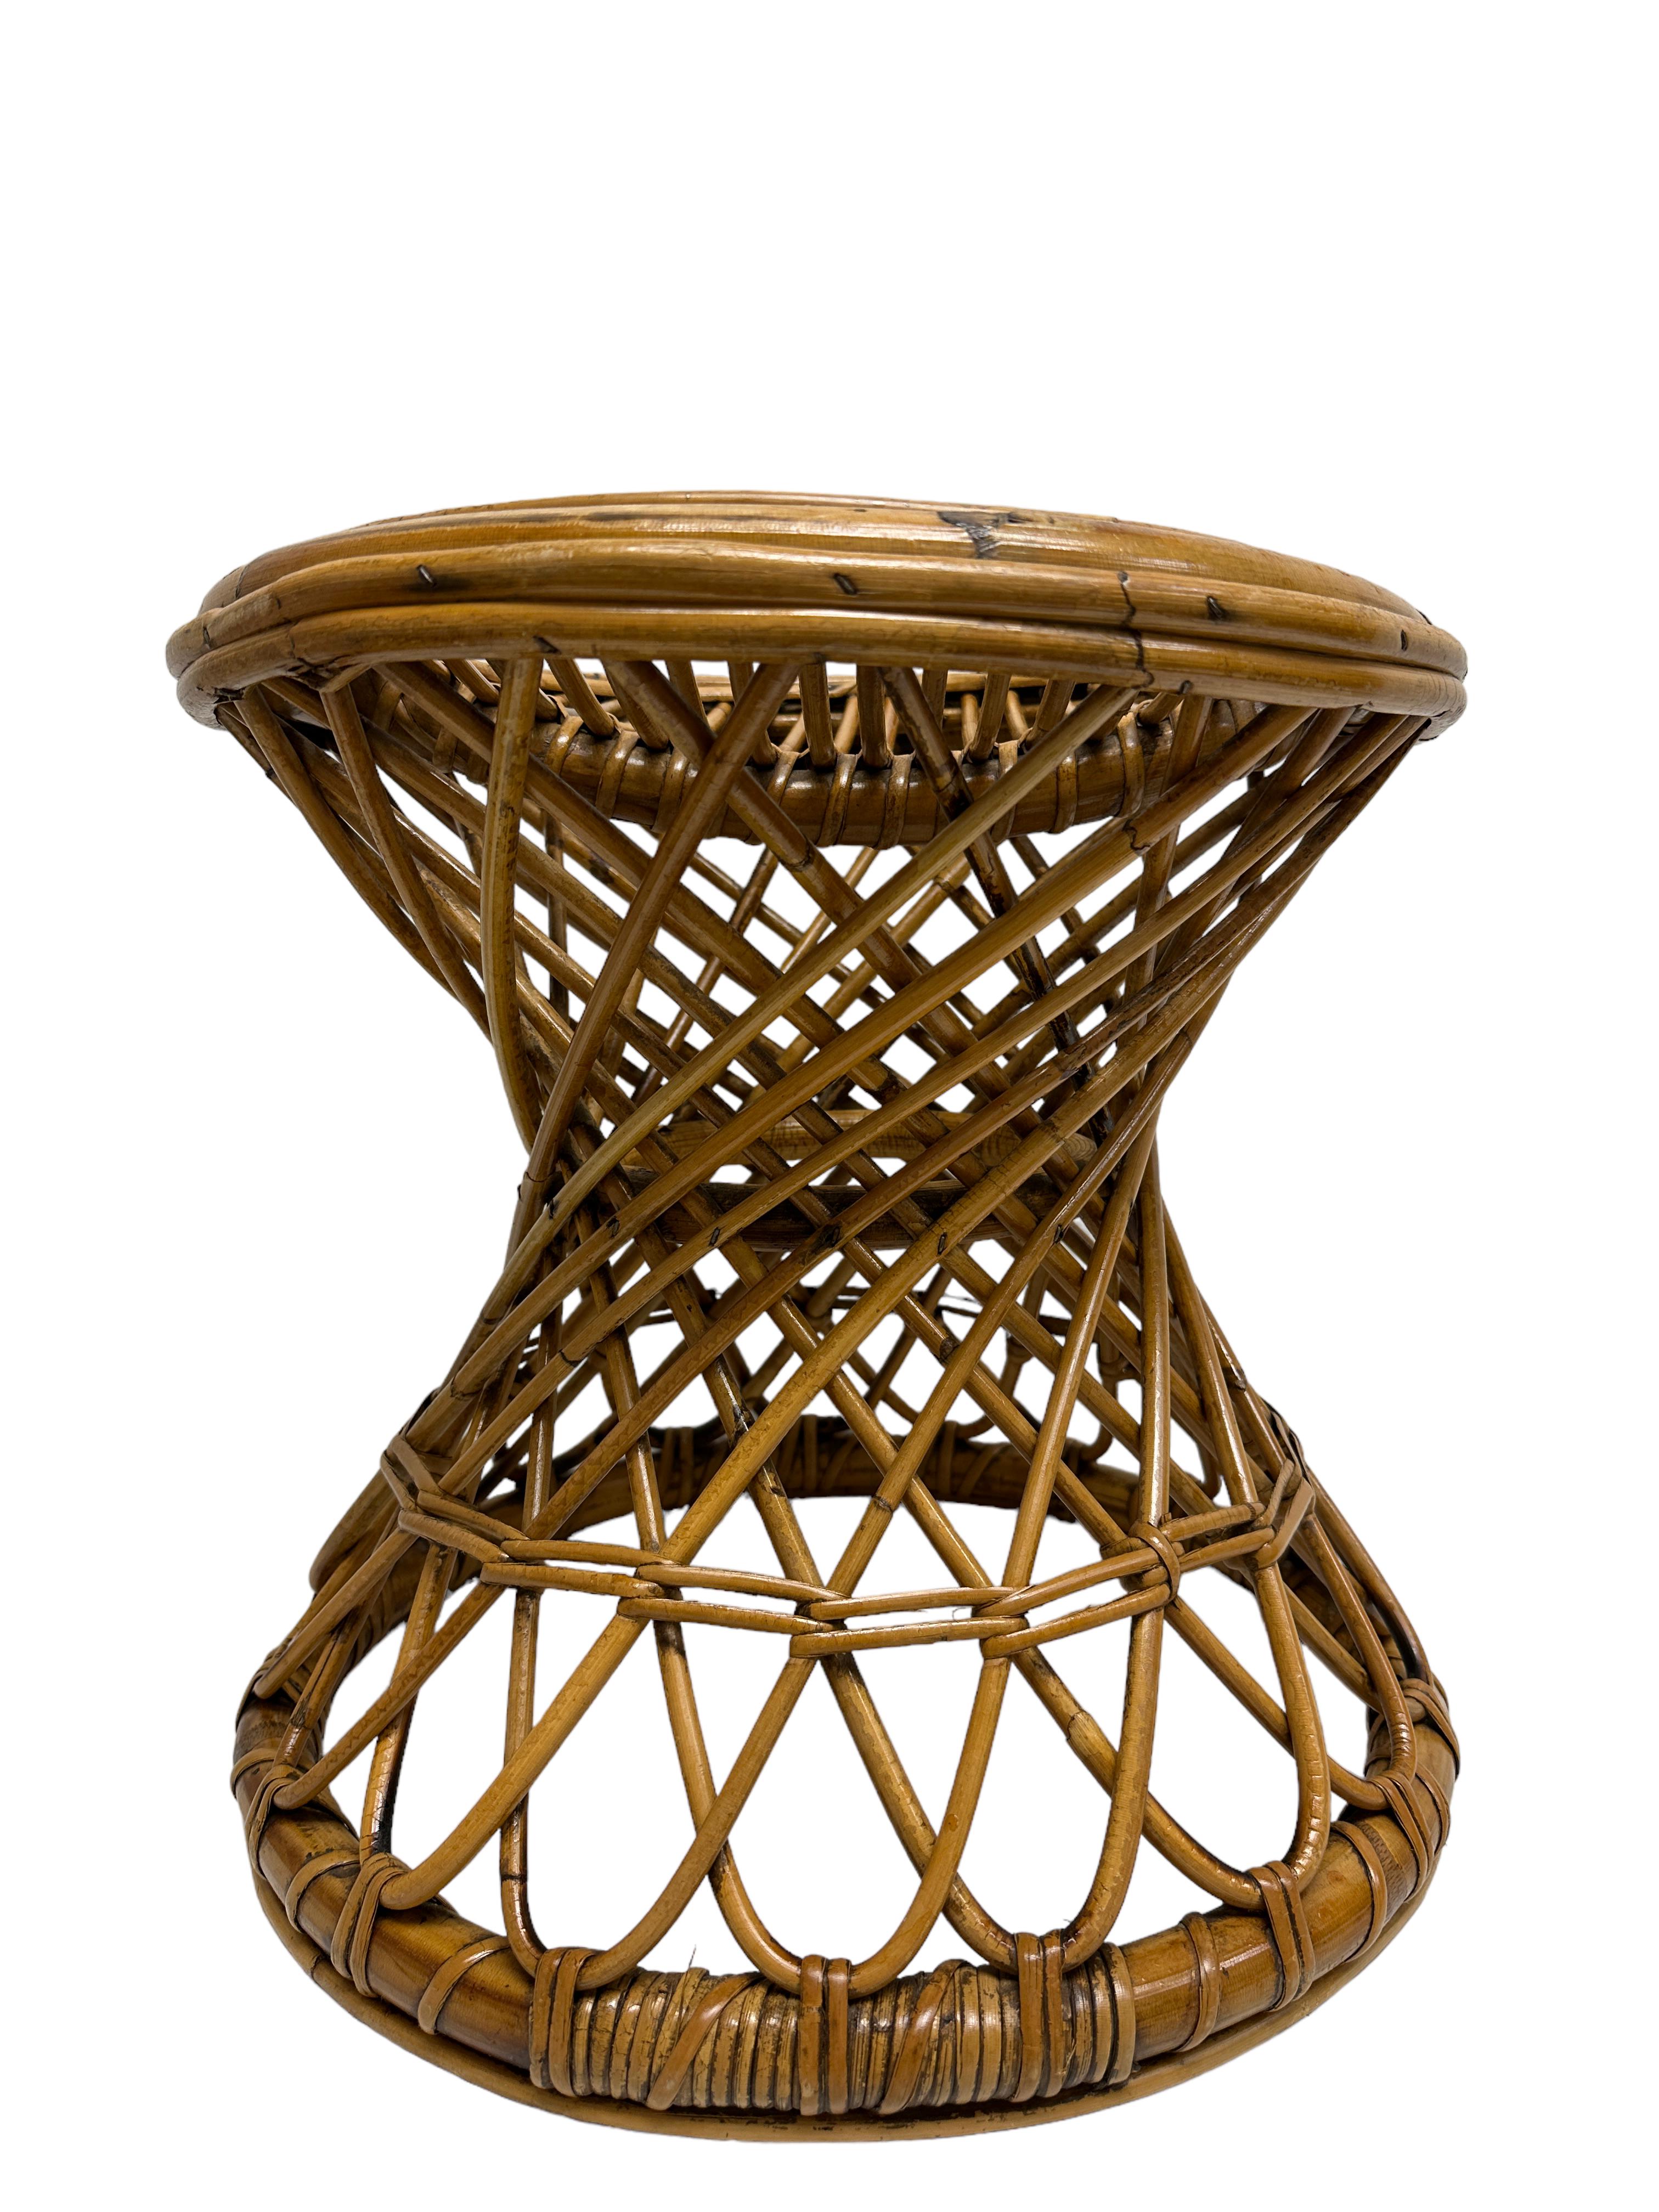 Hand-Crafted Vivai del Sud Bamboo Rattan Decorative Side table Flower Pot Stand or Seat For Sale